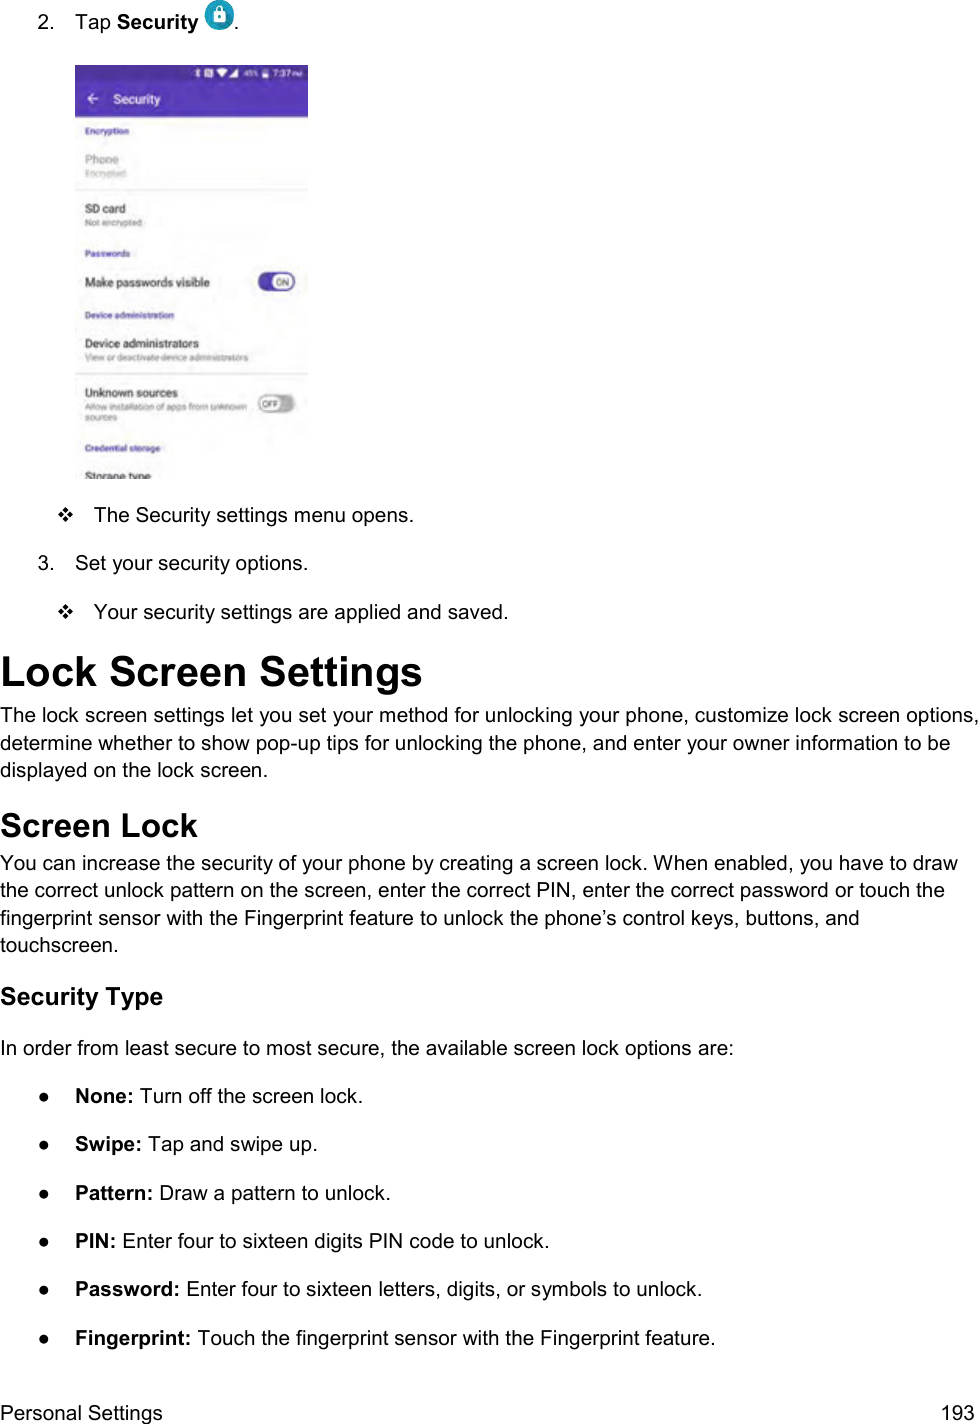  Personal Settings  193 2.  Tap Security  .     The Security settings menu opens. 3.  Set your security options.   Your security settings are applied and saved.  Lock Screen Settings The lock screen settings let you set your method for unlocking your phone, customize lock screen options, determine whether to show pop-up tips for unlocking the phone, and enter your owner information to be displayed on the lock screen. Screen Lock You can increase the security of your phone by creating a screen lock. When enabled, you have to draw the correct unlock pattern on the screen, enter the correct PIN, enter the correct password or touch the fingerprint sensor with the Fingerprint feature to unlock the phone’s control keys, buttons, and touchscreen. Security Type In order from least secure to most secure, the available screen lock options are: ●  None: Turn off the screen lock.  ●  Swipe: Tap and swipe up.  ●  Pattern: Draw a pattern to unlock. ●  PIN: Enter four to sixteen digits PIN code to unlock. ●  Password: Enter four to sixteen letters, digits, or symbols to unlock. ●  Fingerprint: Touch the fingerprint sensor with the Fingerprint feature. 